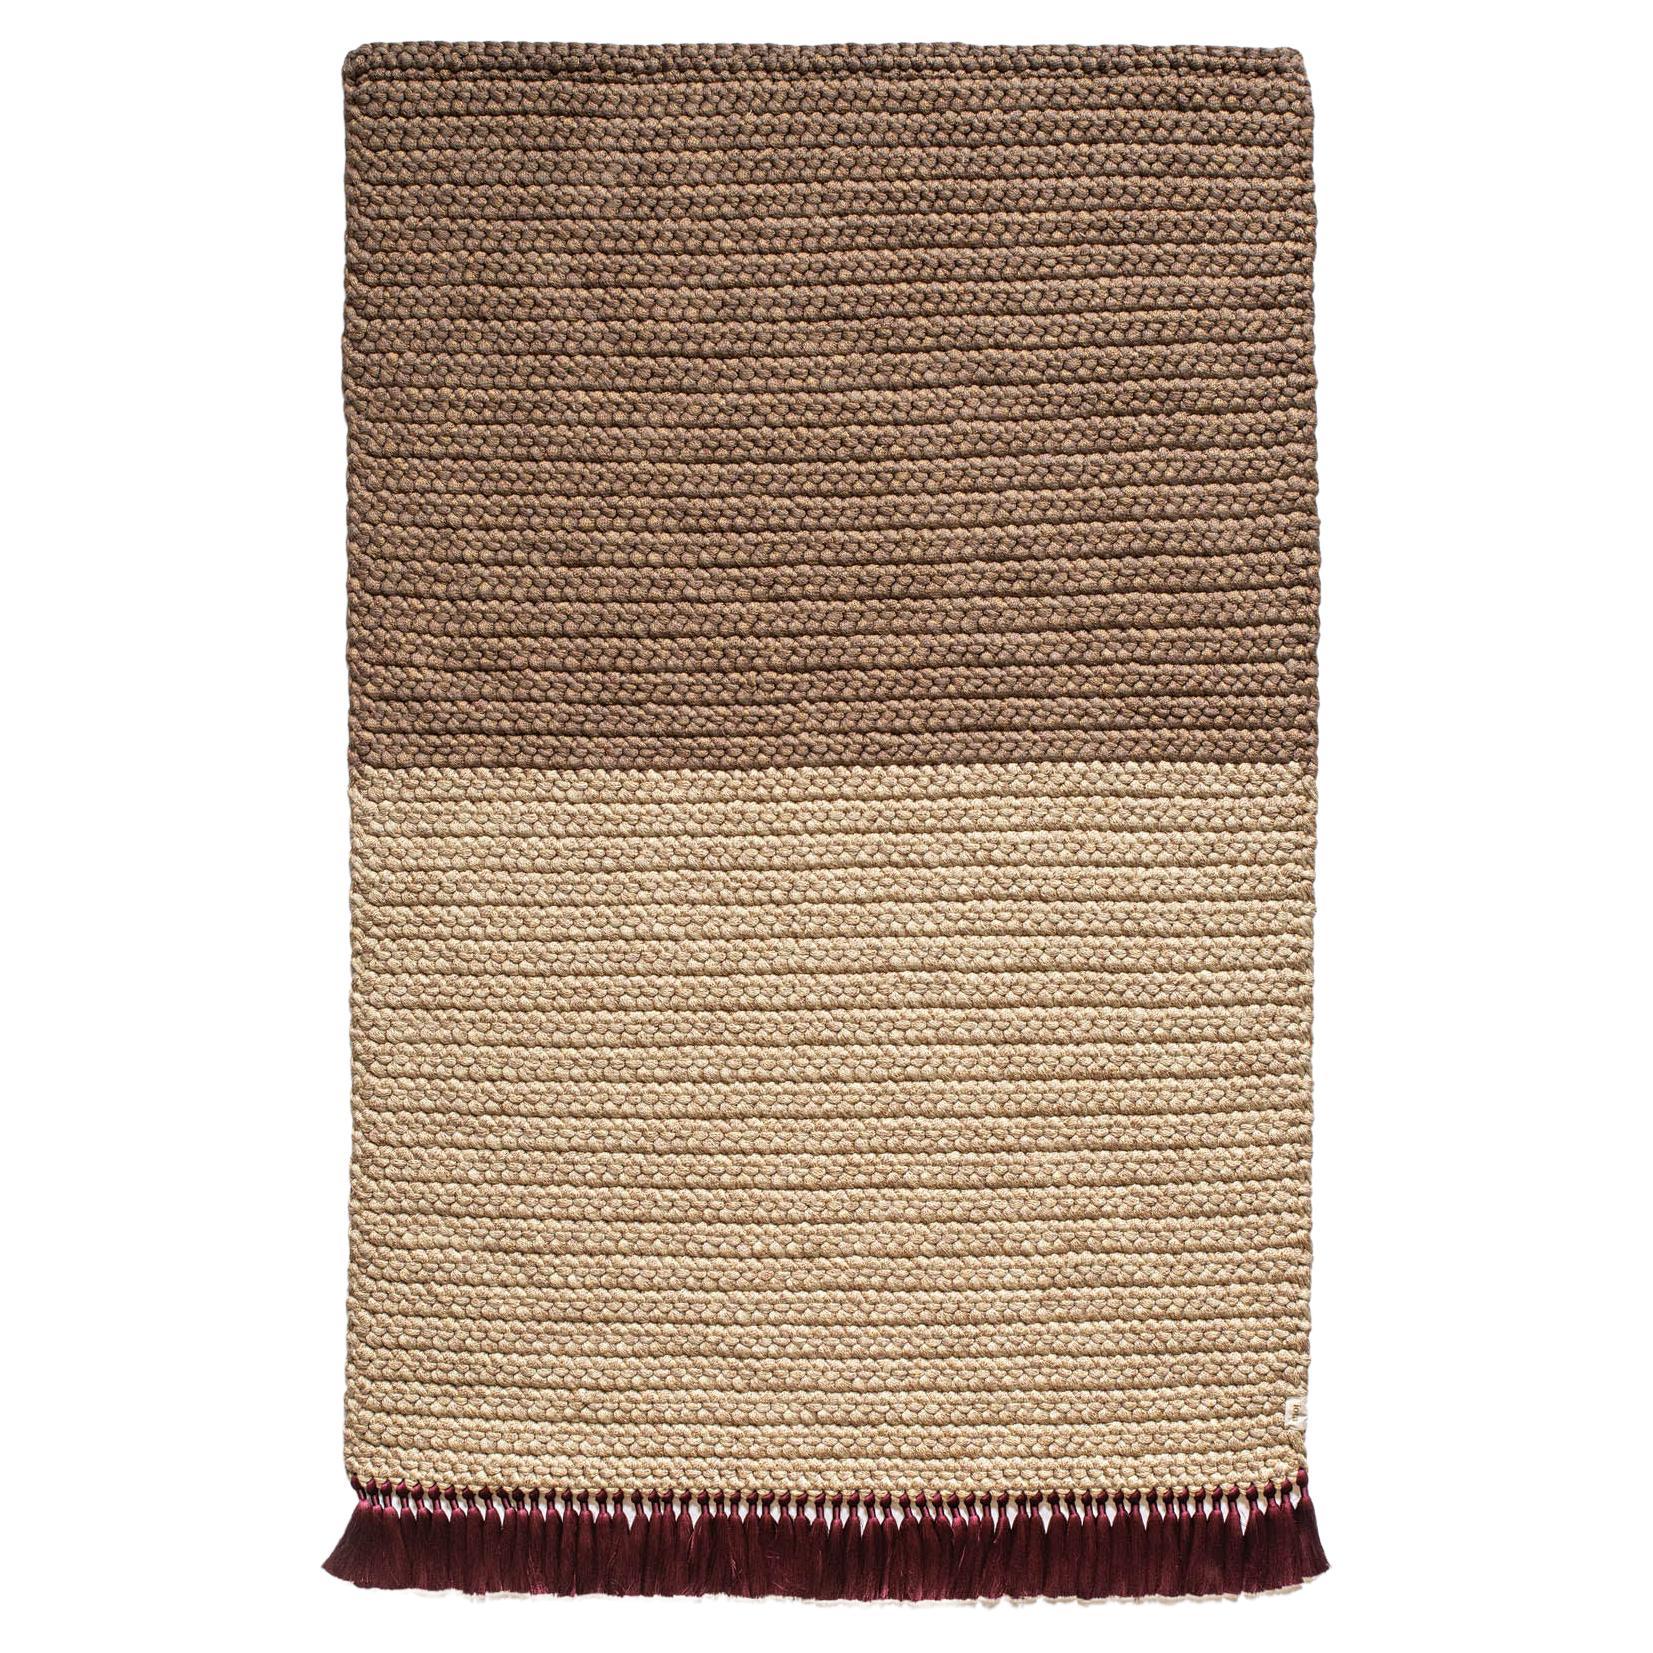 Handmade Crochet Two-Tone Rug in Beige Brown made of Cotton & Polyester by iota